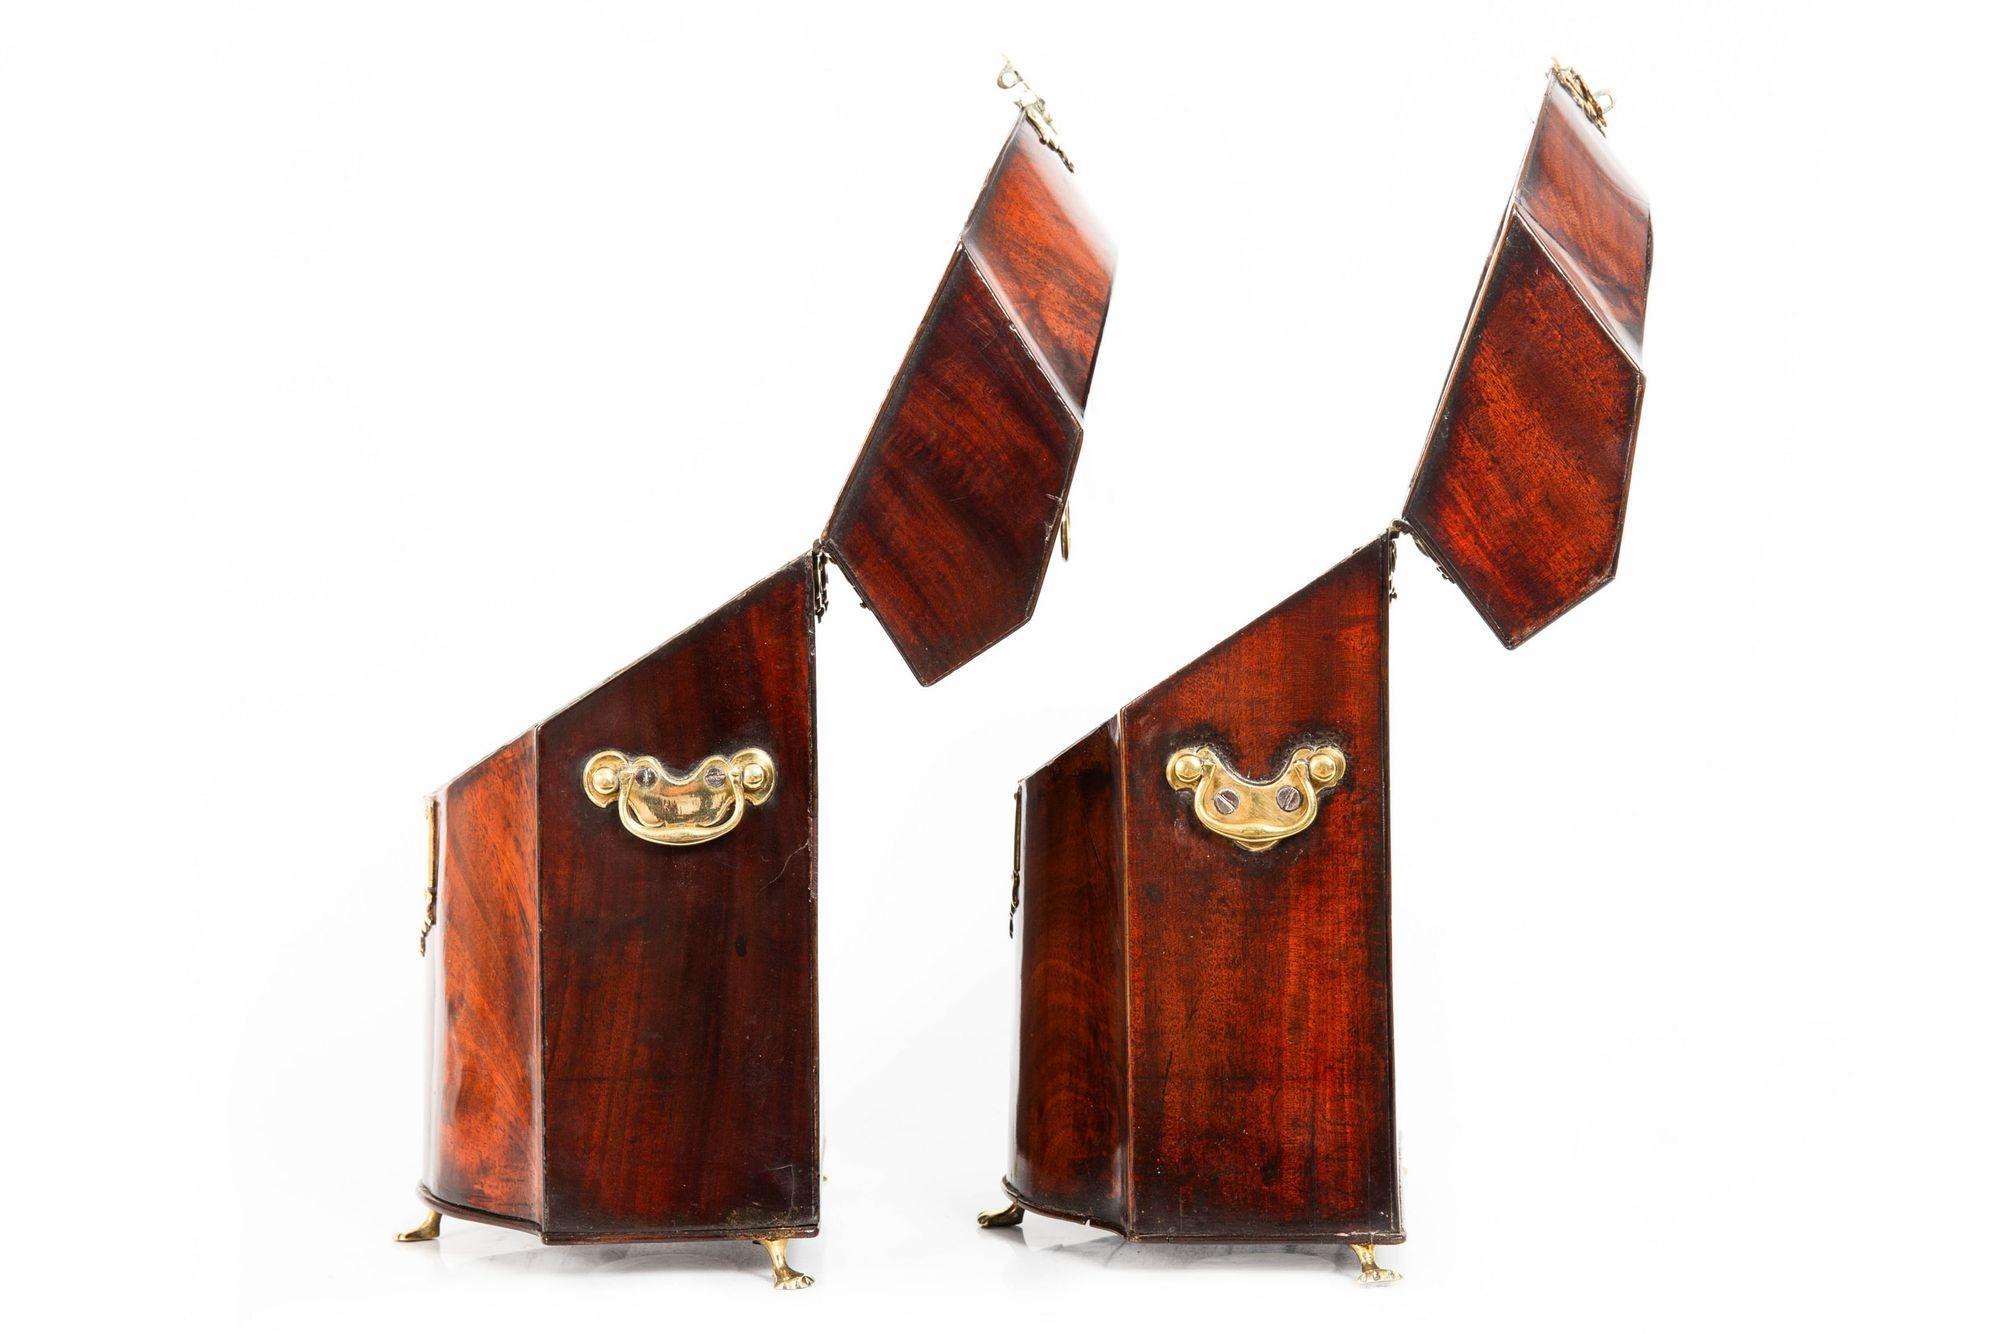 Fine Pair of English George III Period Antique Mahogany Boxes circa 1780 In Good Condition For Sale In Shippensburg, PA